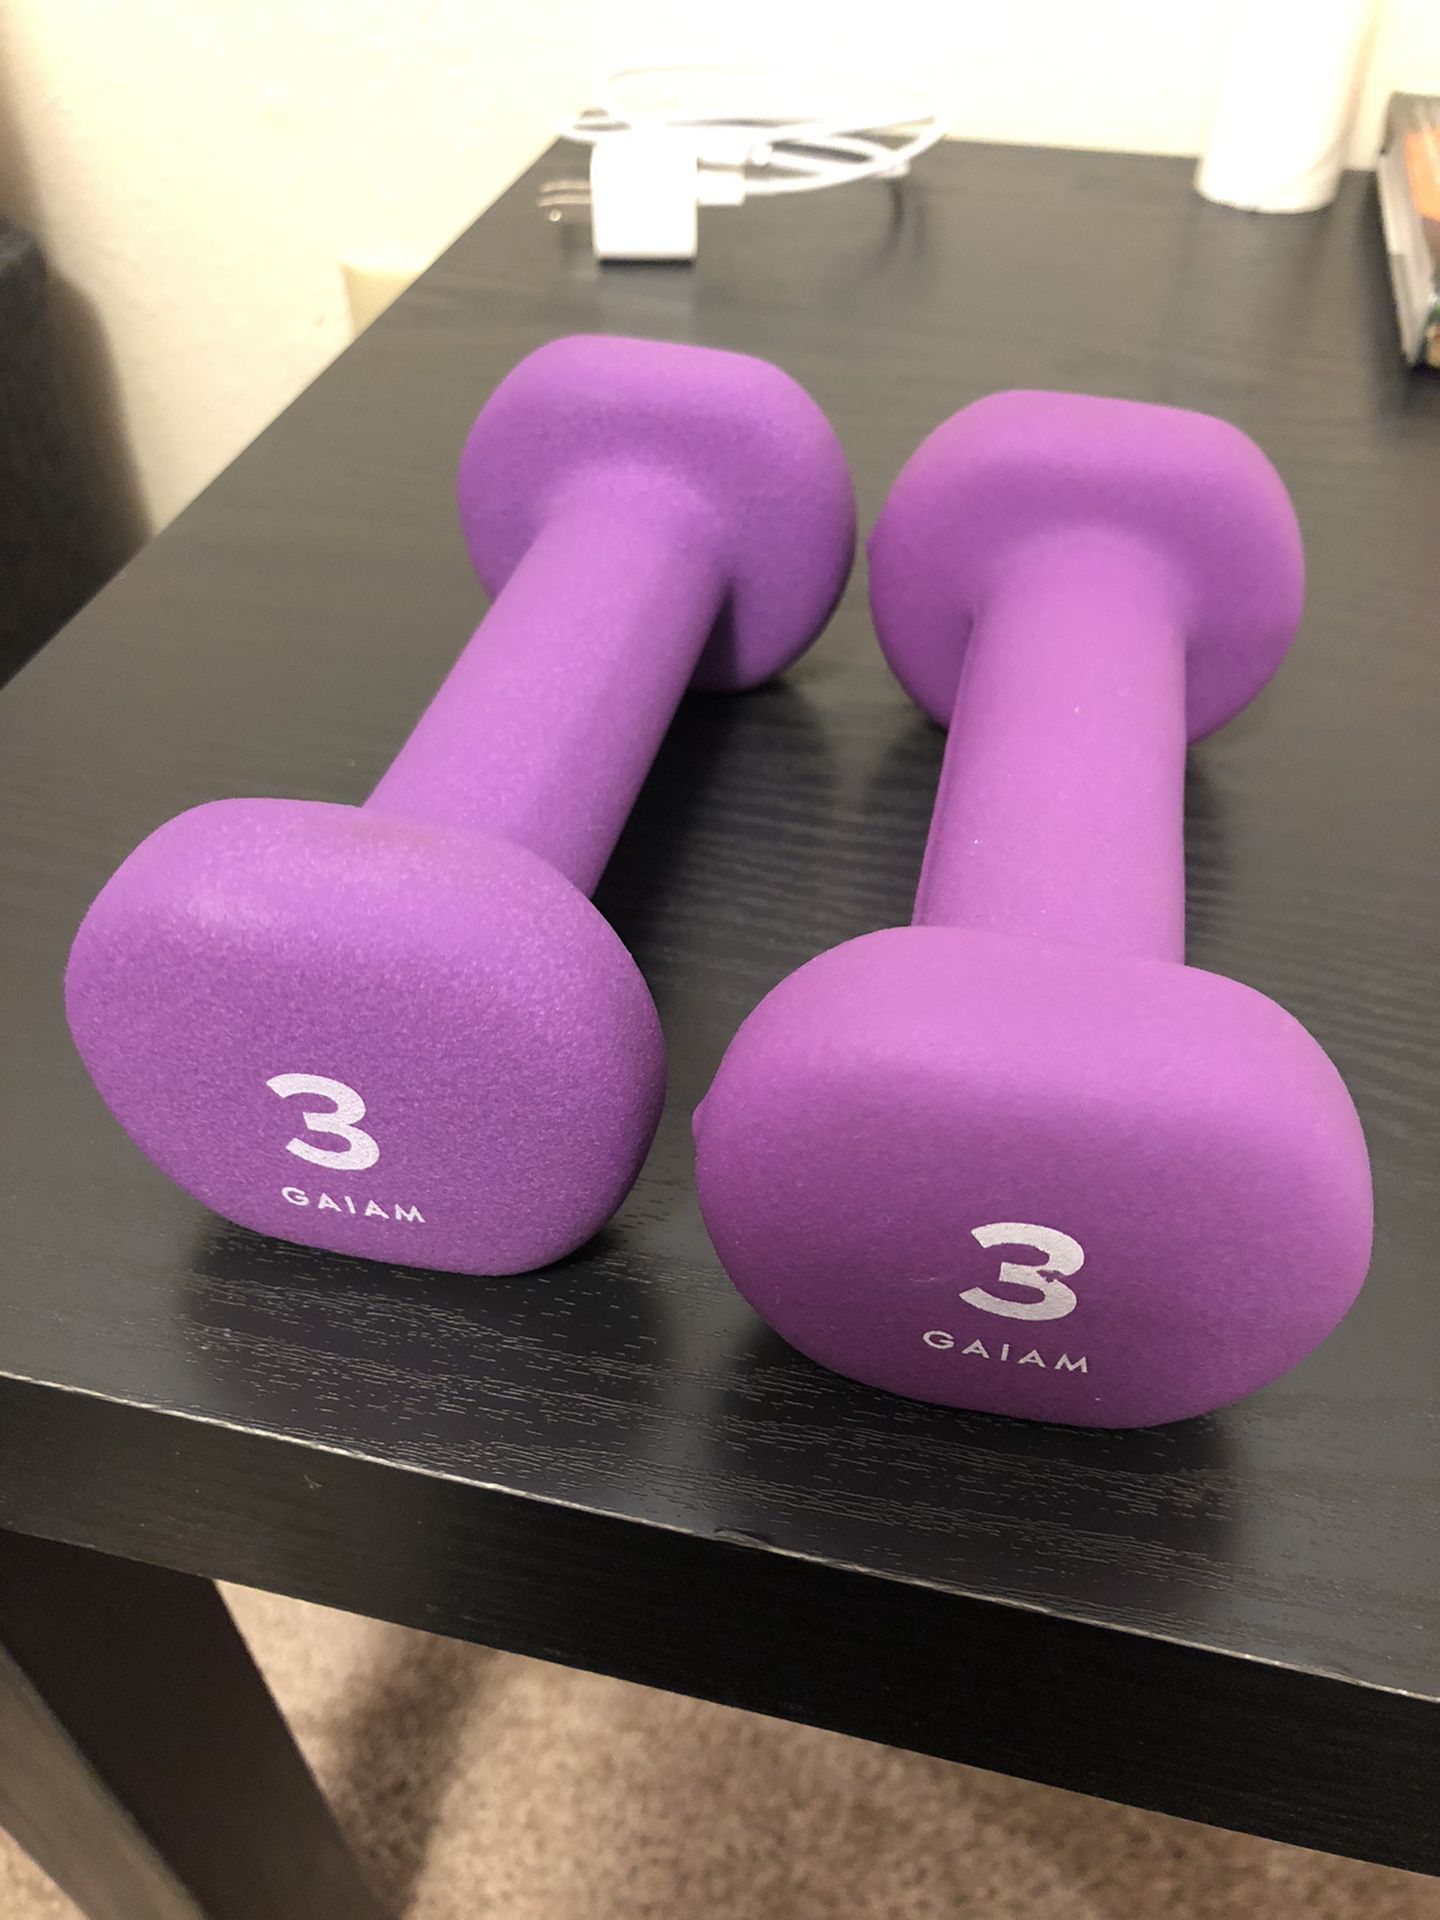 3 lb. hand weights